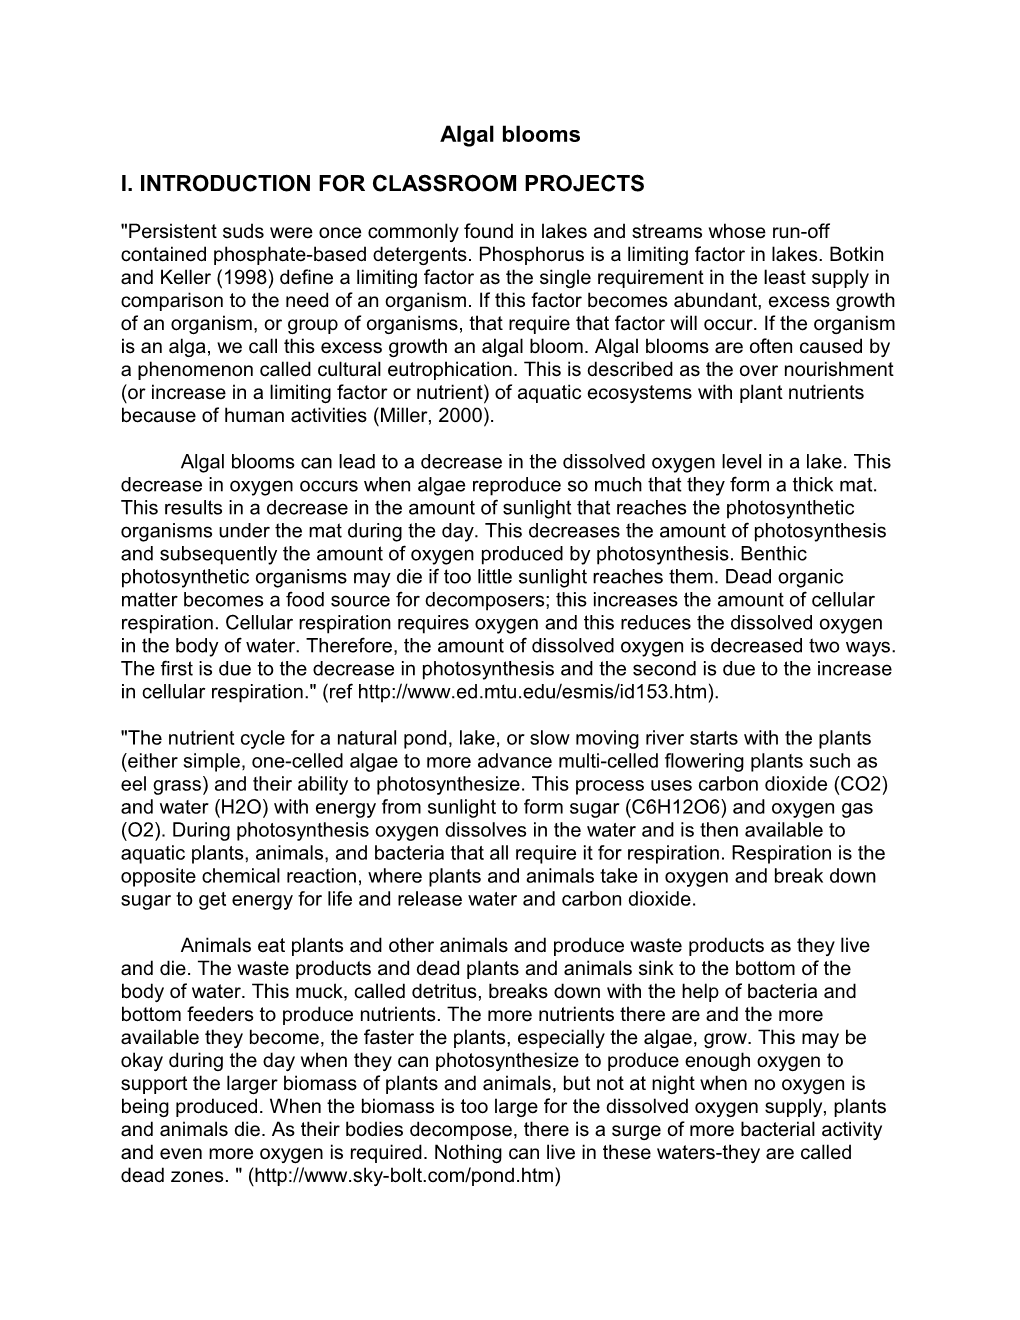 I. Introduction for Classroom Projects